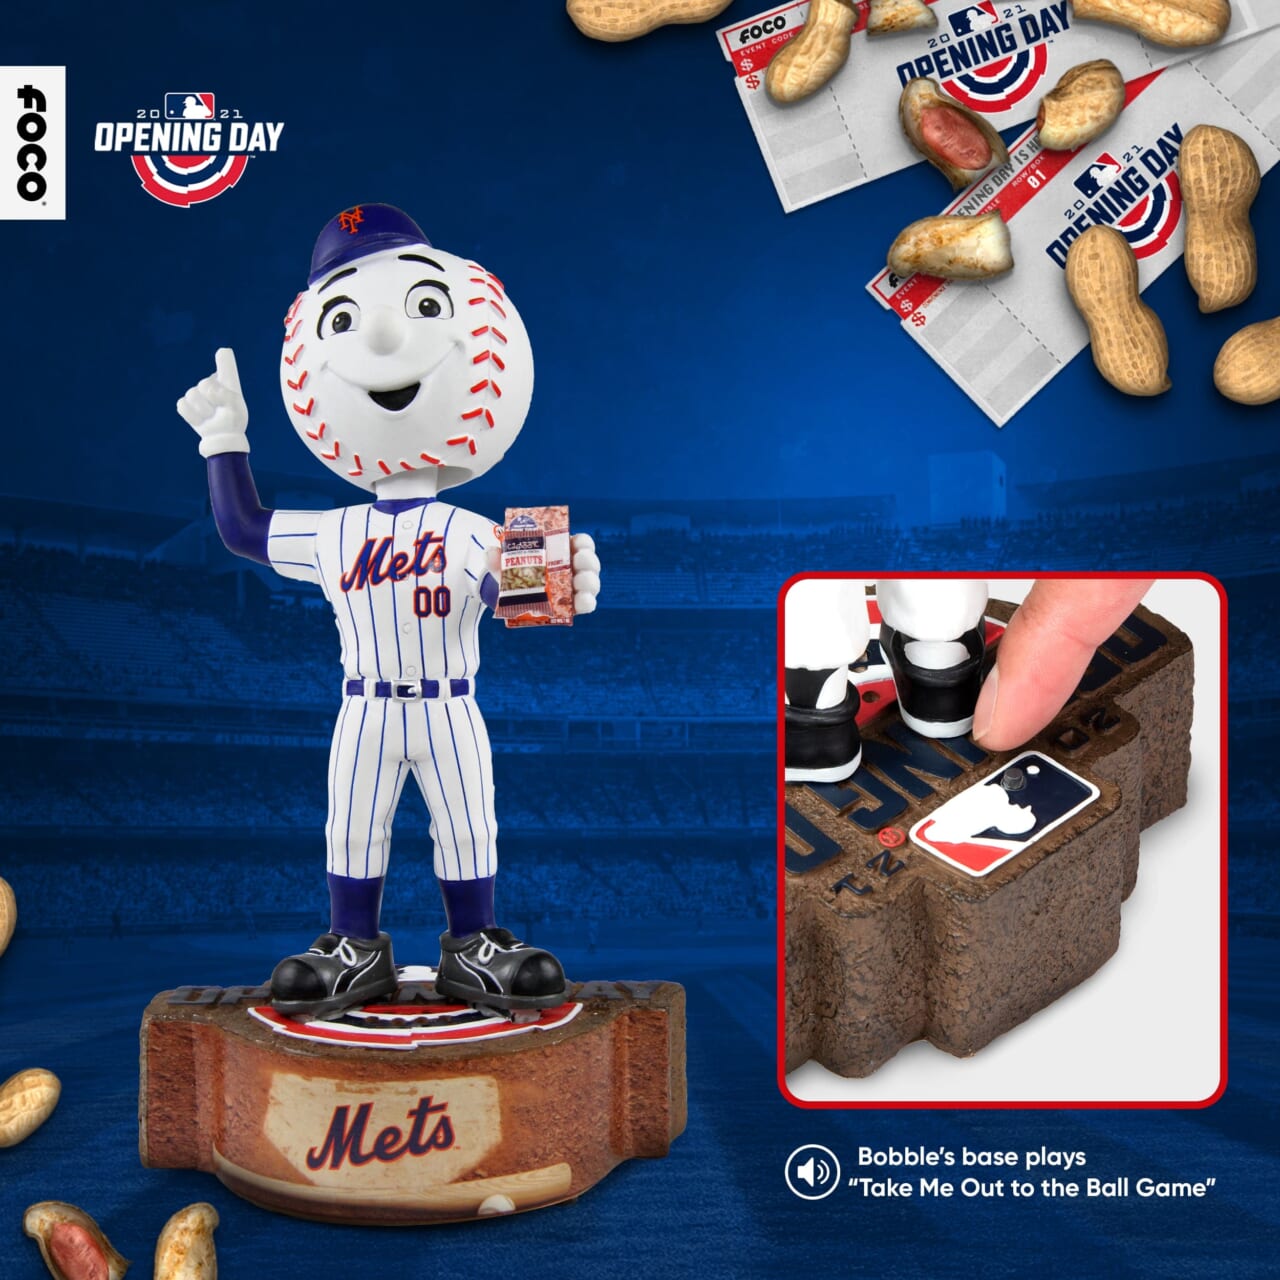 FOCO Releasing New York Mets Mascot Opening Day Bobblehead